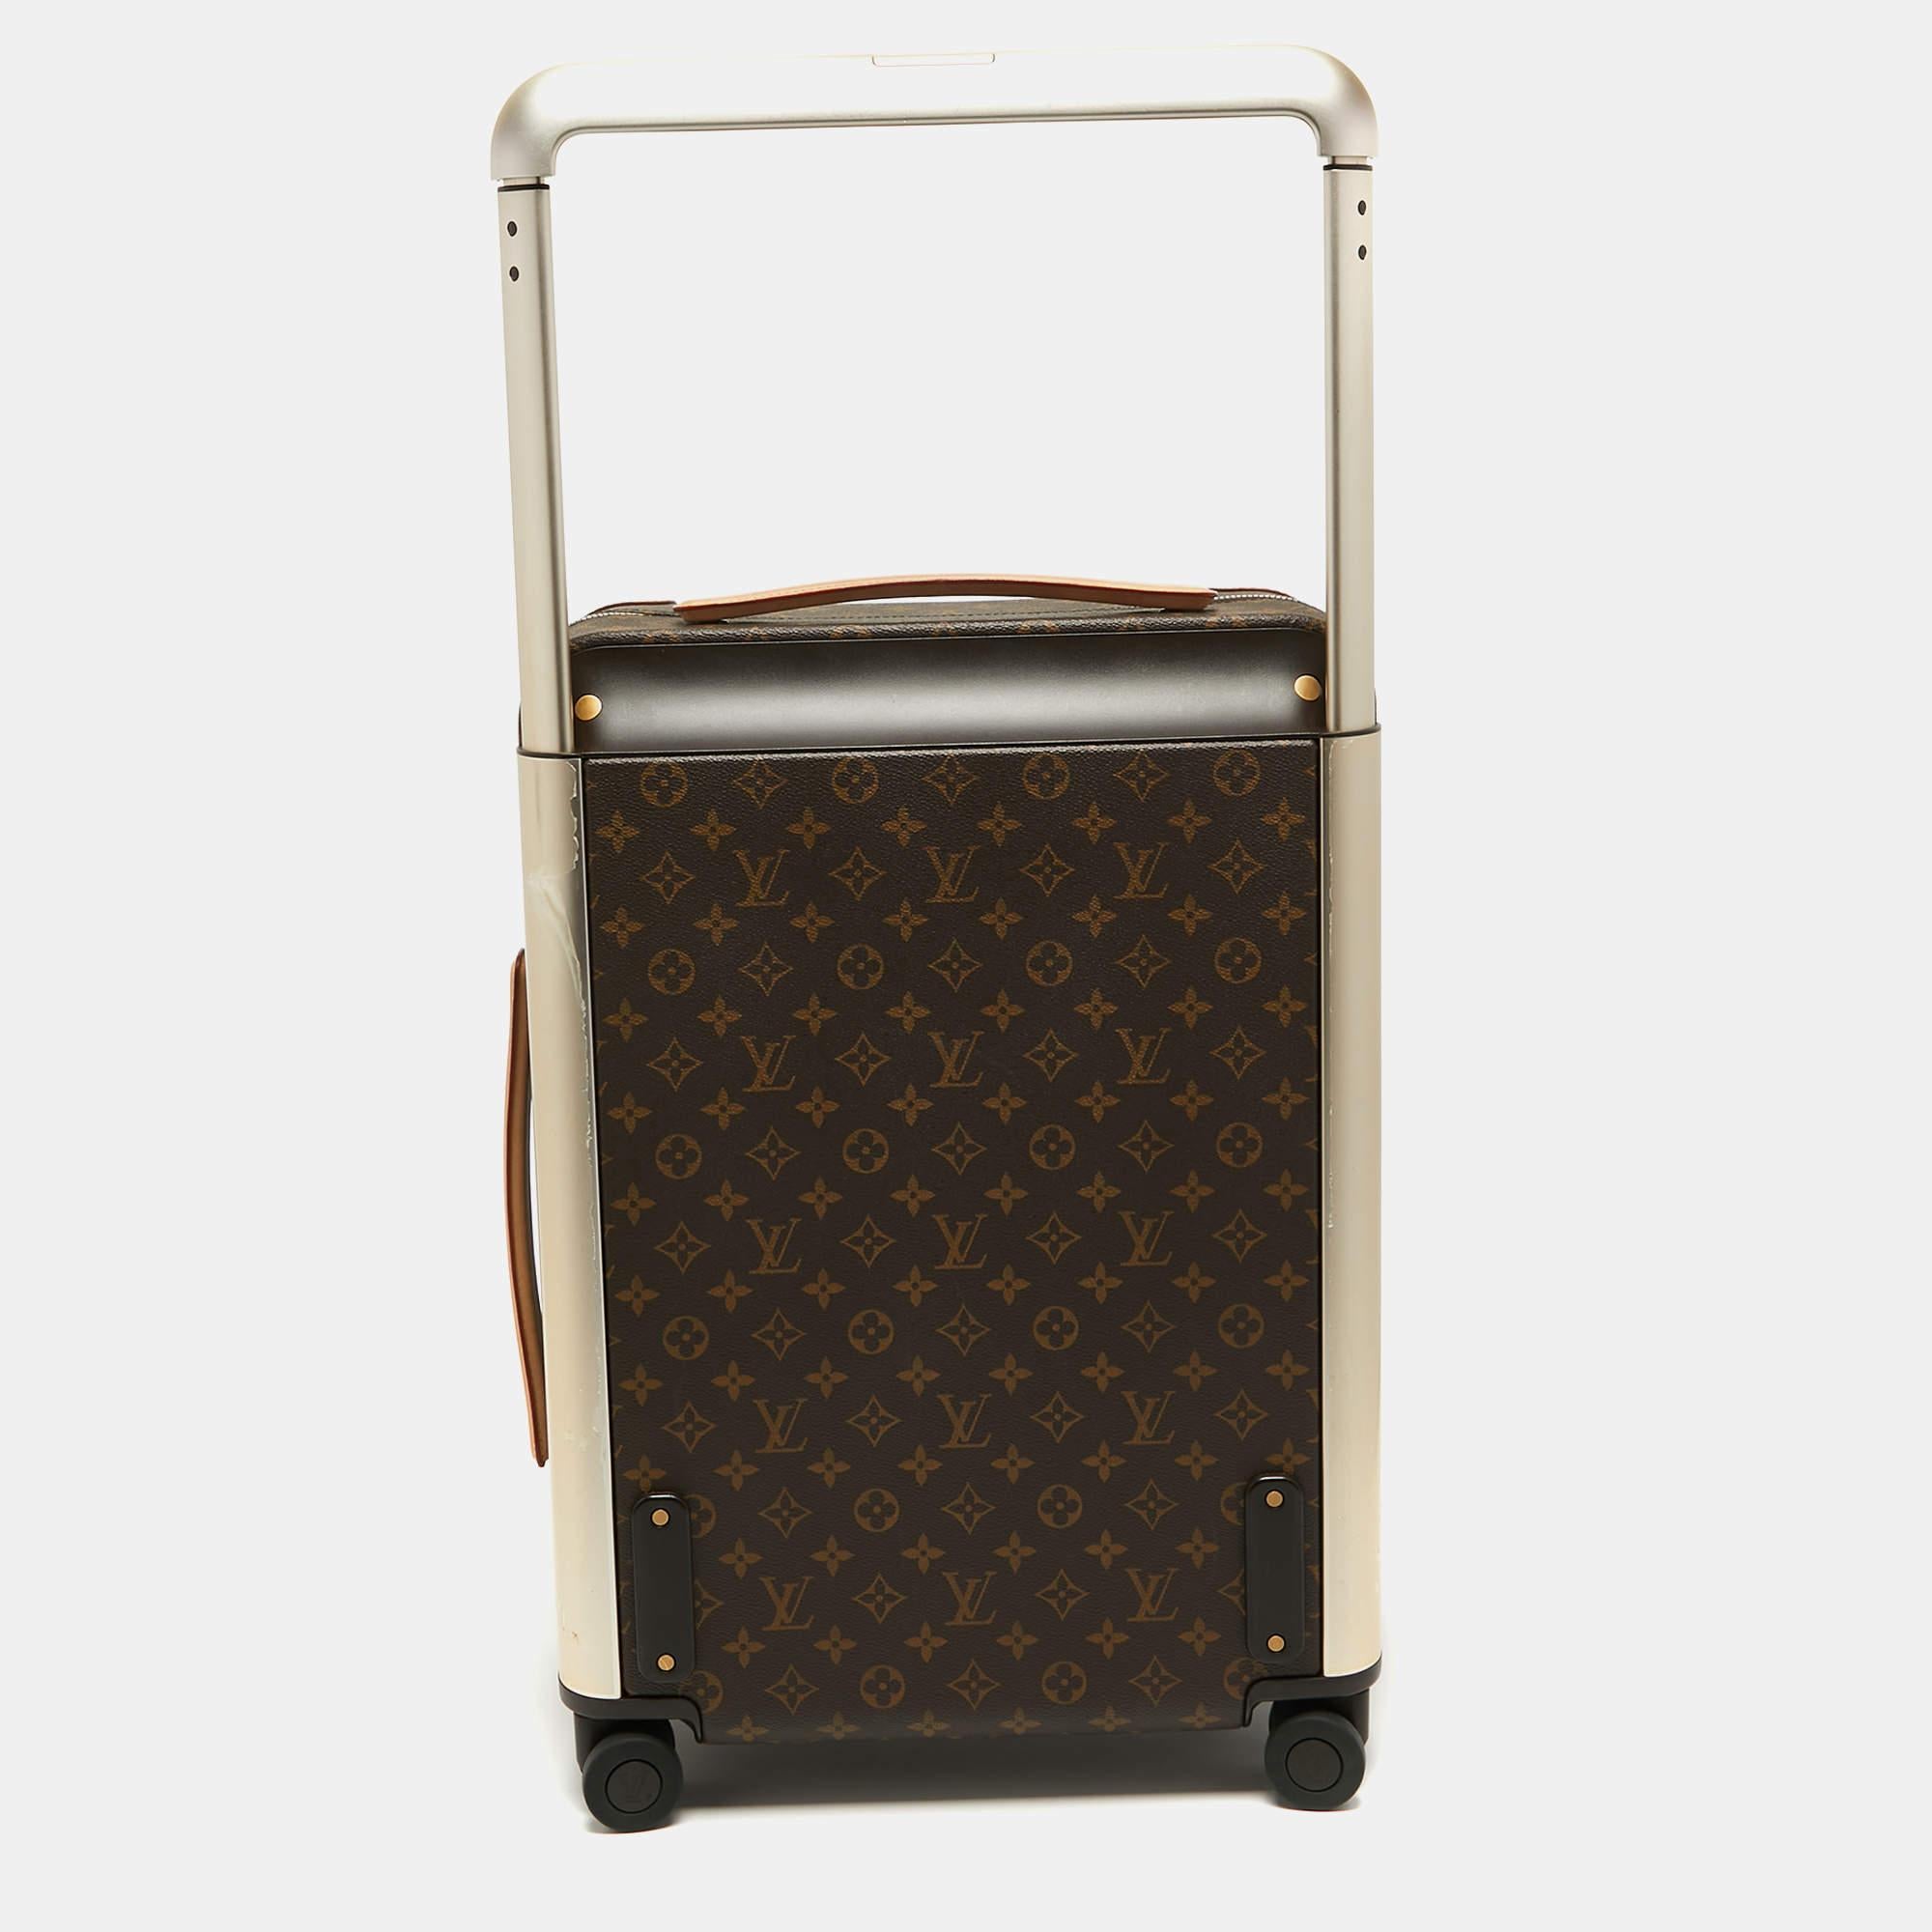 Match your travel essentials to your style with this luxurious designer suitcase from Louis Vuitton. It is crafted using Monogram canvas and has four wheels and a handle.

